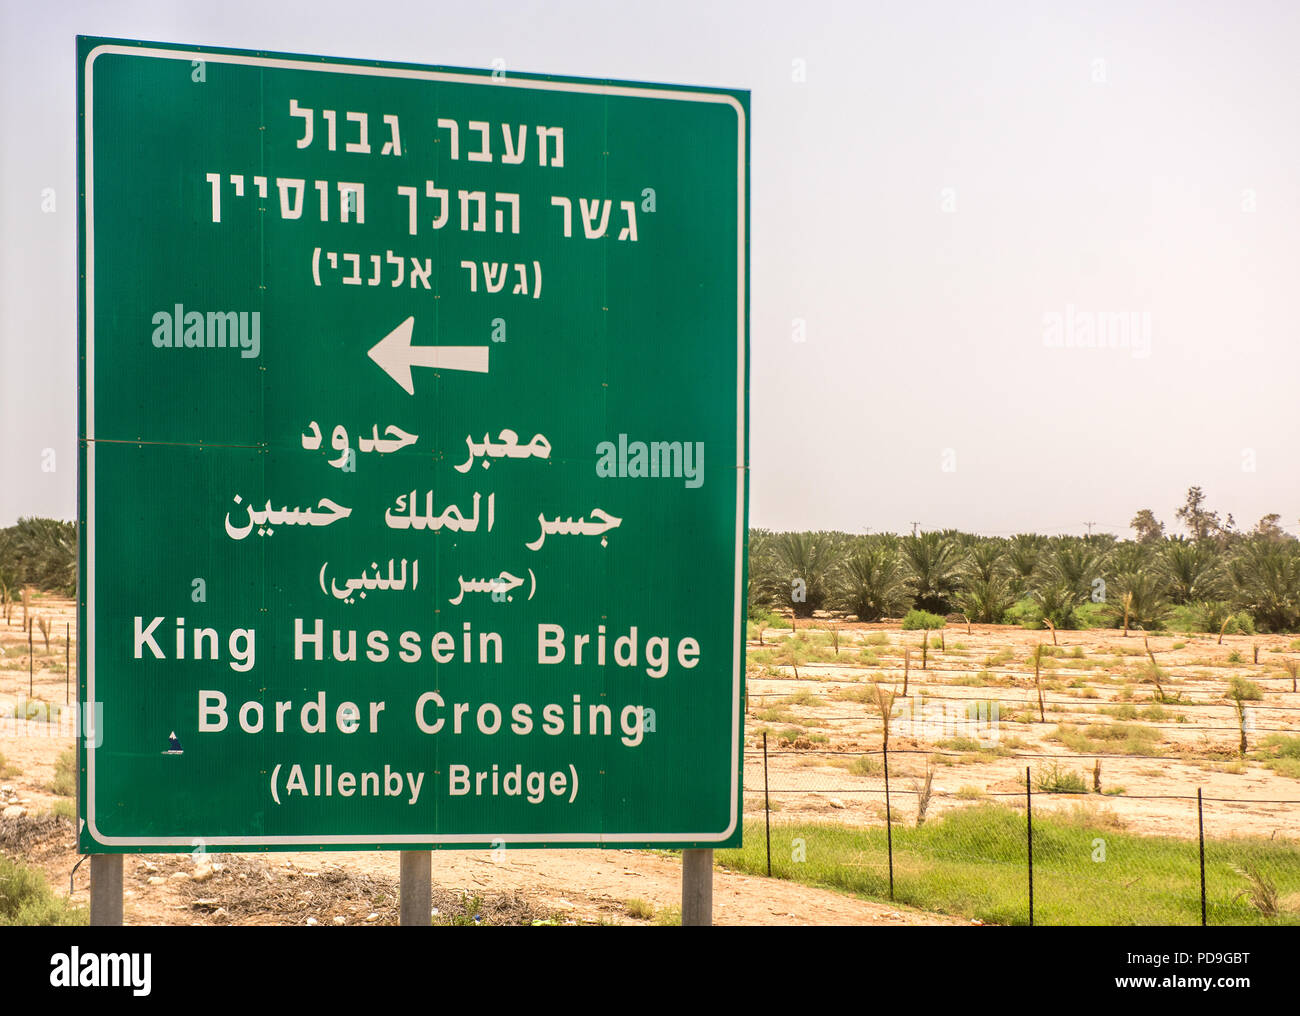 Israel Jordan border, May19  2018:  Road sign on the West Bank  for the King Hussein border crossing at Allenby Bridge  between Israel and Jordan.  In Stock Photo